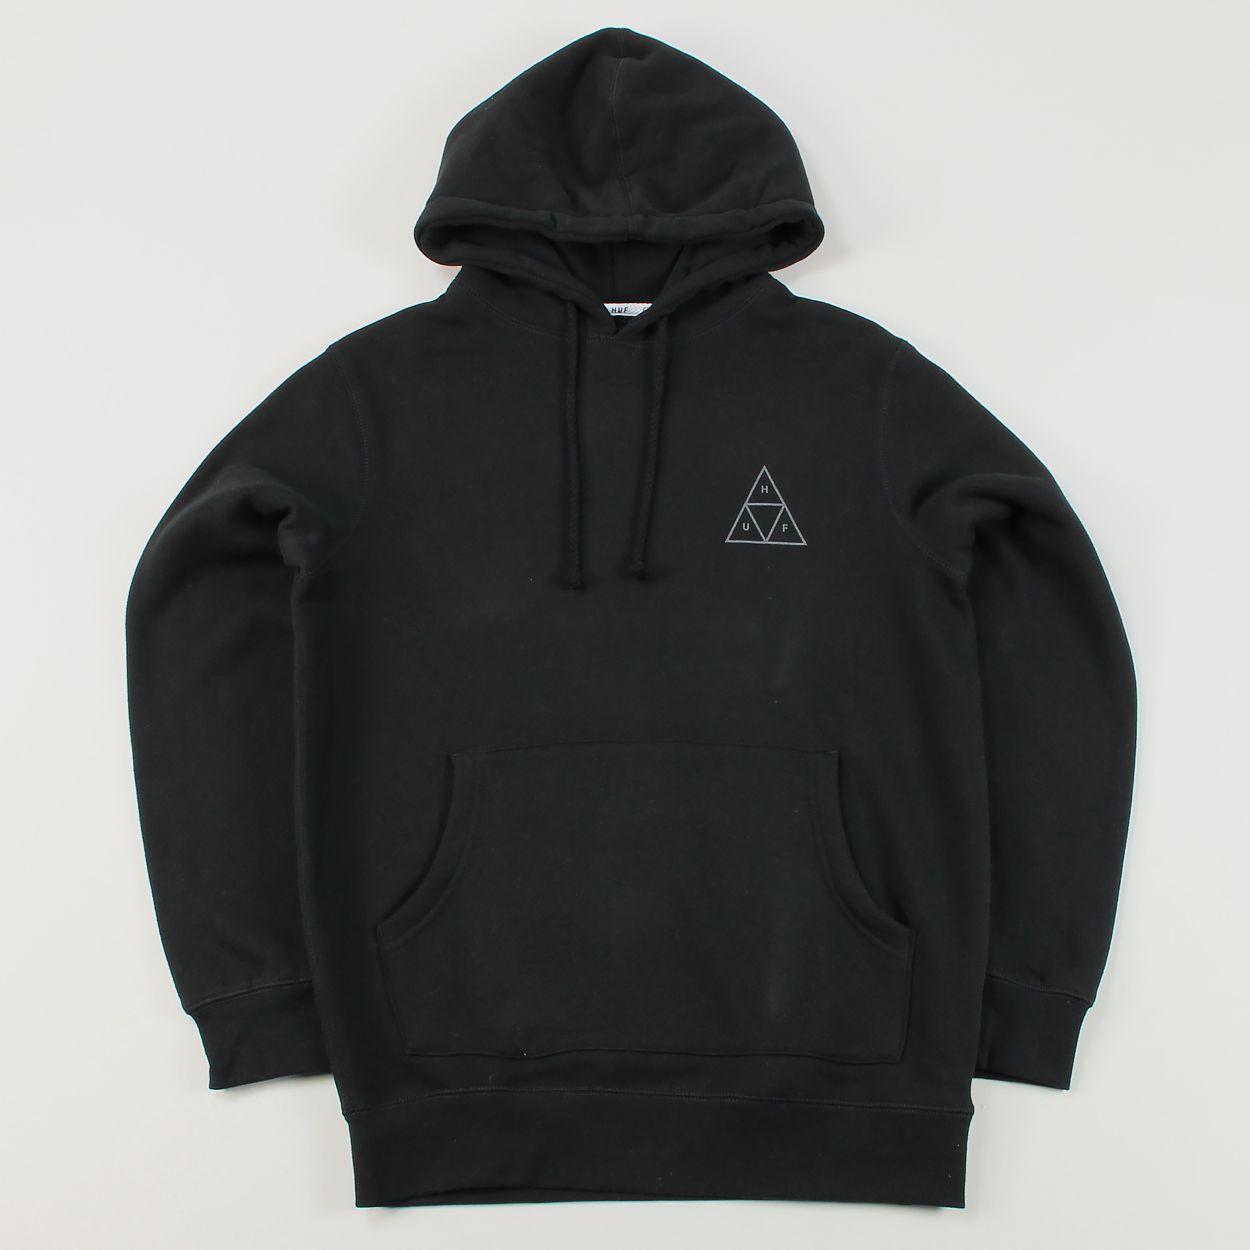 Grey and White Triangle Logo - Huf Pullover Mens Triple Triangle Hoodie Sweater Black Grey £48.75